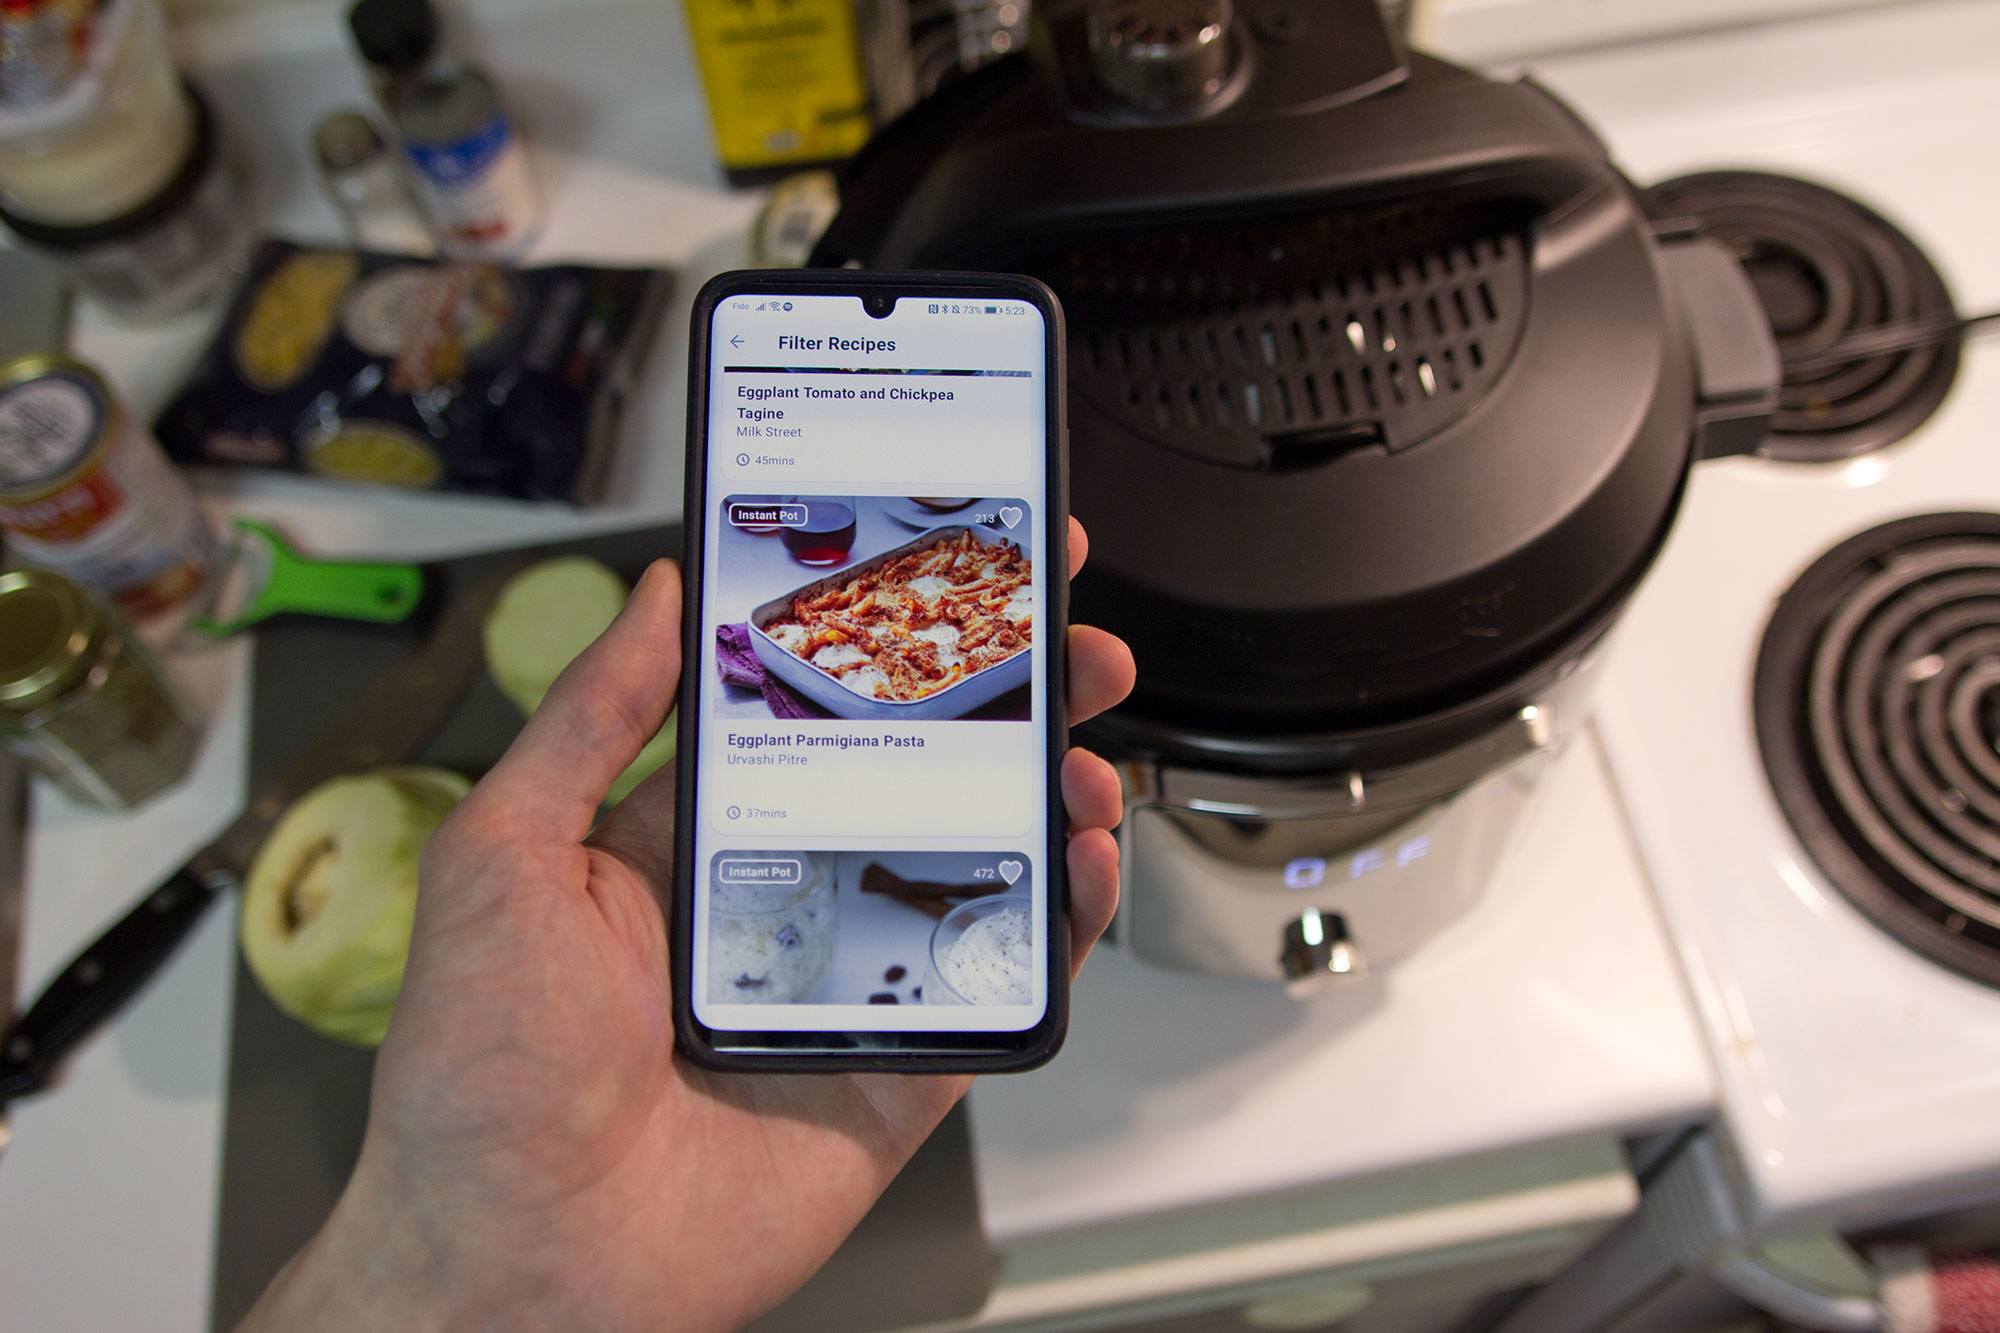 Instant Pot Pro Plus brings smart cooking to the kitchen